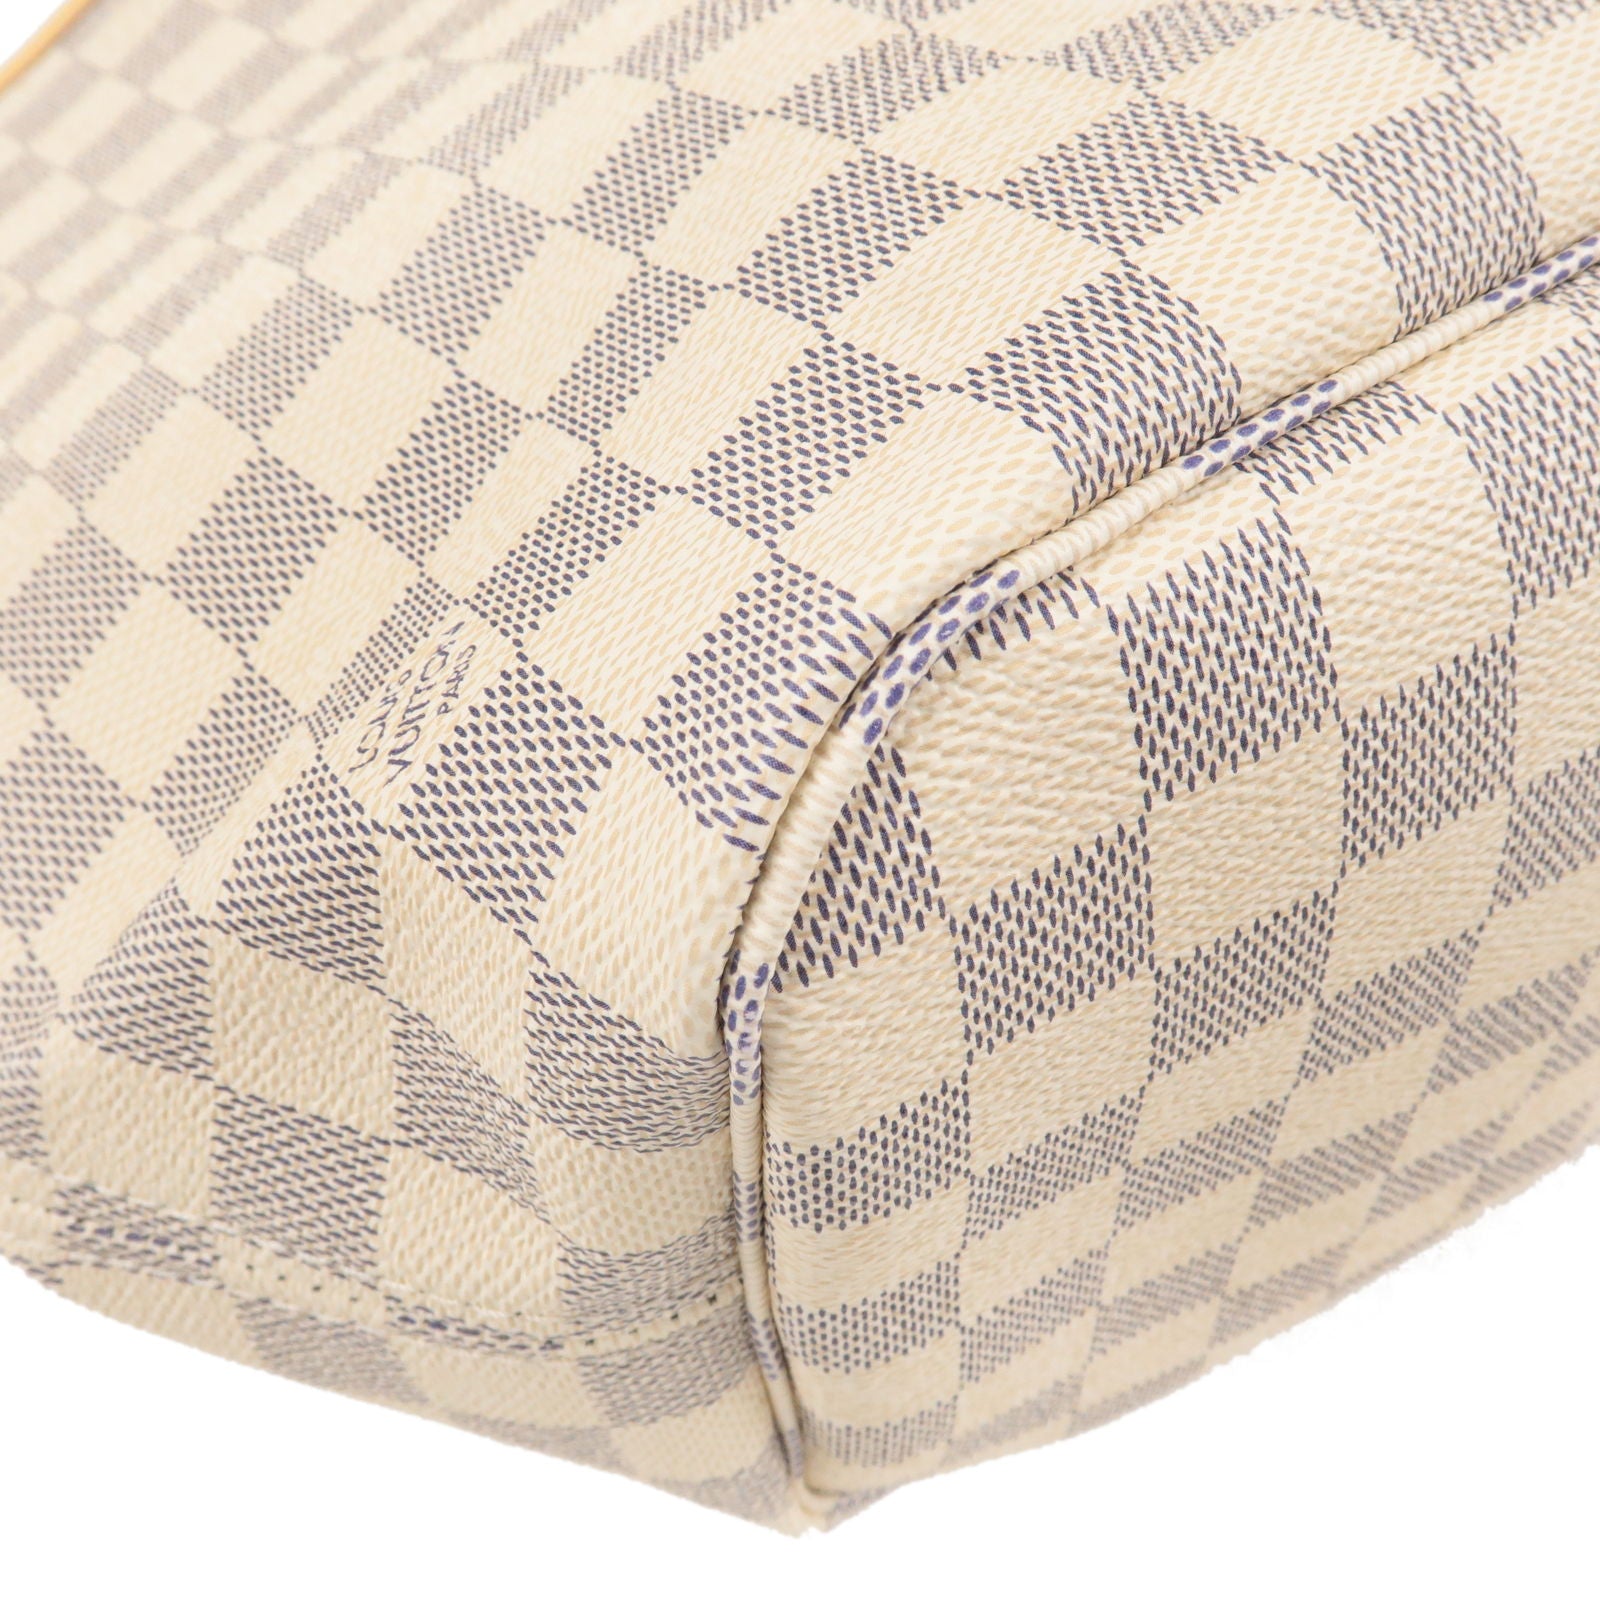 Louis Vuitton Damier Azur Neverfull MM with Pink Lining N41605  Louis  vuitton damier, Louis vuitton damier azur, Louis vuitton